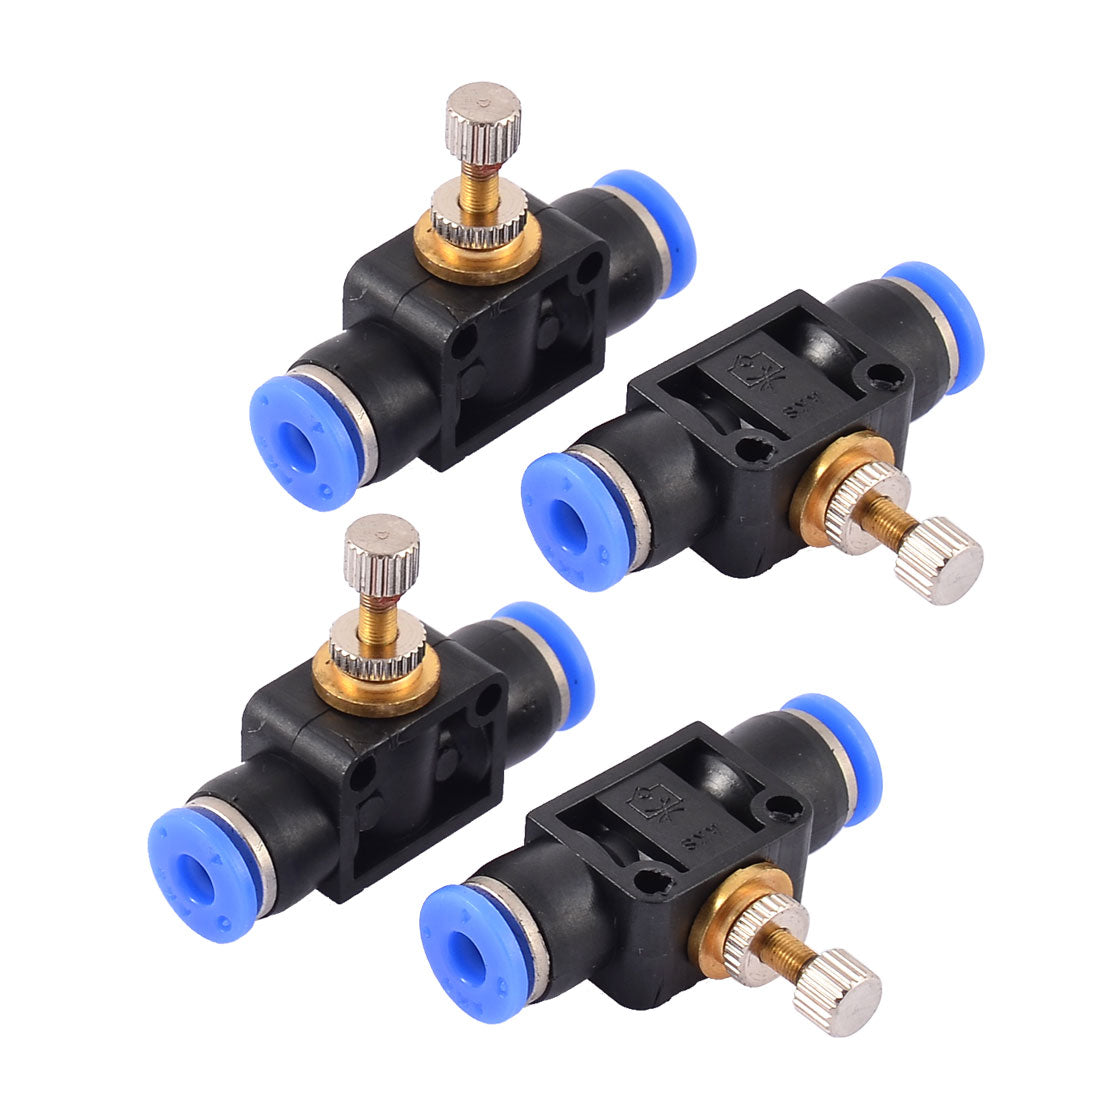 uxcell Uxcell 4pcs 4mm to 4mm Tube Push in Speed Controller Valve Regulators Pneumatic Quick Fittings